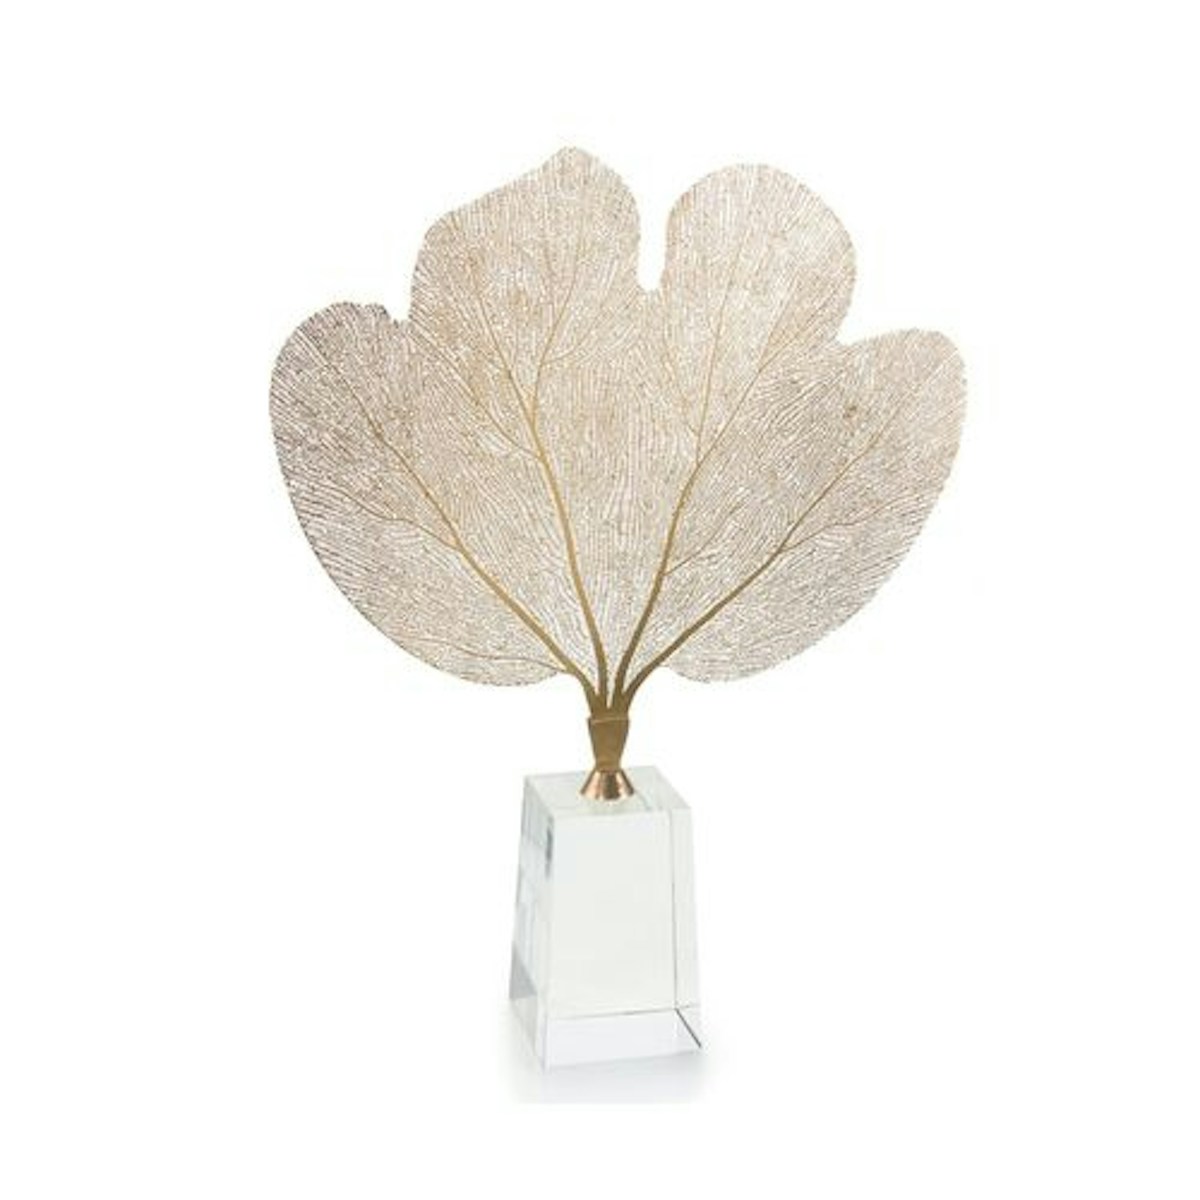 Brass Sea Fan on Crystal Base - 6 Best Coral Decor Ideas To Buy For Your Home - LuxDeco.com